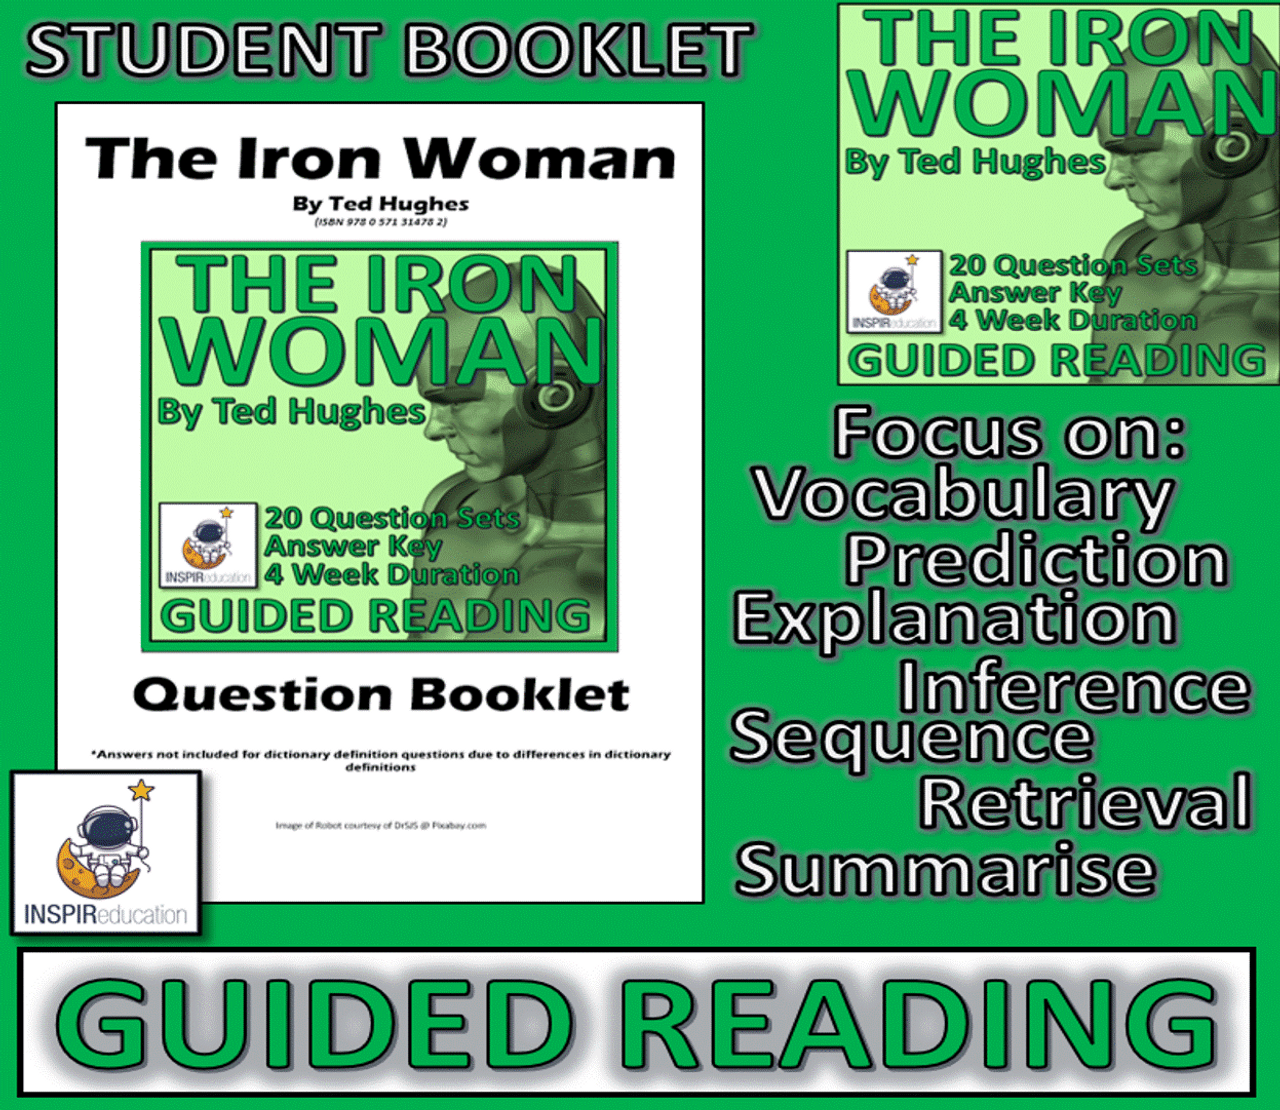 GUIDED READING: The Iron Woman by Ted Hughes - 20 Question Sets, Answer Key